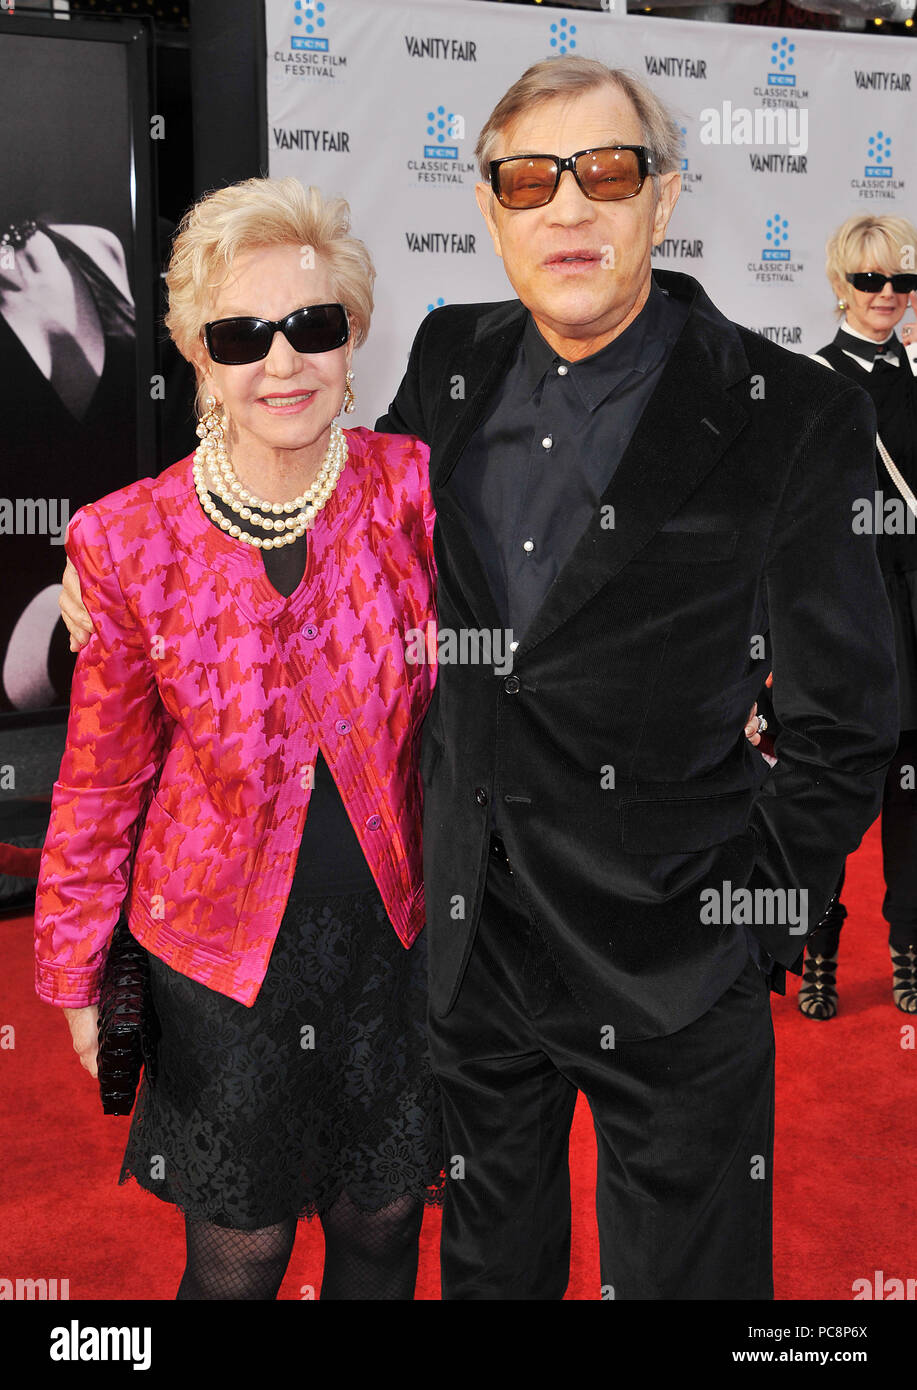 Patricia McCallum, Michael York   at the 40th Anniversary Restoration of CABARET at the Opening Night of the TCM Classic Film Festival.Patricia McCallum, Michael York -   ------------- Red Carpet Event, Vertical, USA, Film Industry, Celebrities,  Photography, Bestof, Arts Culture and Entertainment, Topix Celebrities fashion /  Vertical, Best of, Event in Hollywood Life - California,  Red Carpet and backstage, USA, Film Industry, Celebrities,  movie celebrities, TV celebrities, Music celebrities, Photography, Bestof, Arts Culture and Entertainment,  Topix, vertical,  family from from the year , Stock Photo